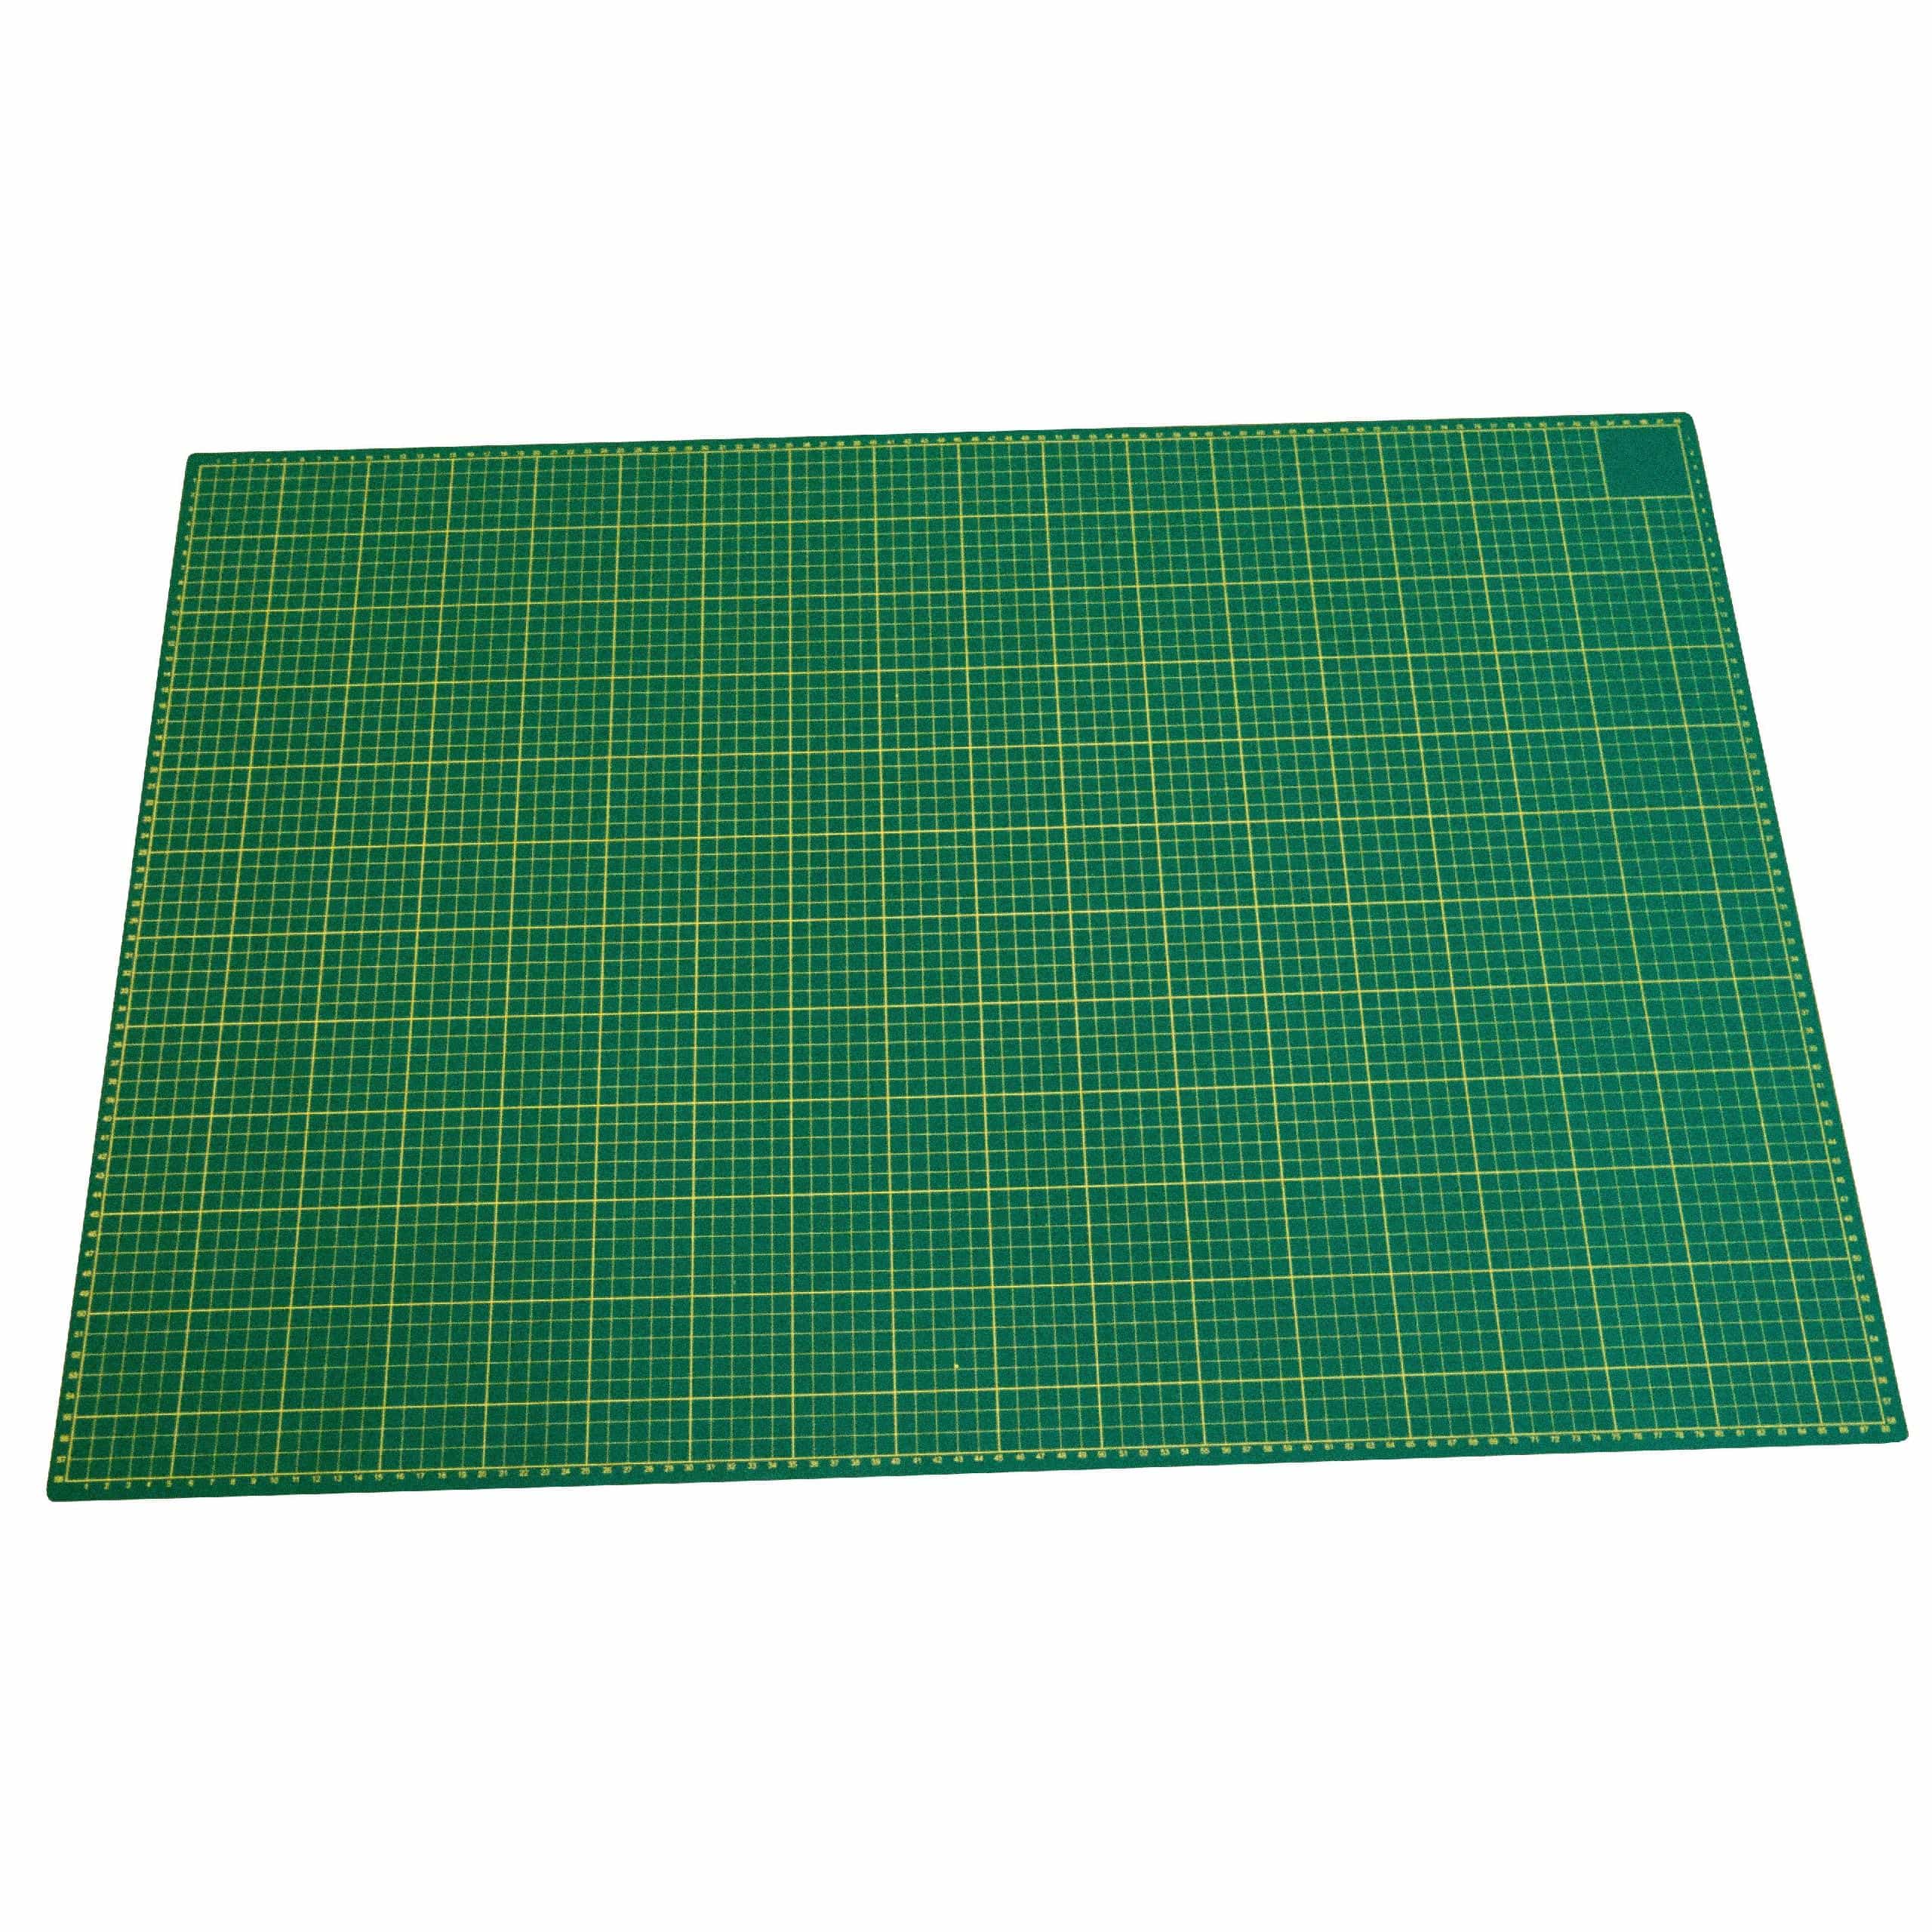 Cutting Mat - A1 Working Surface, 90 x 60 cm, Self-Healing, With Grid, Double-Sided